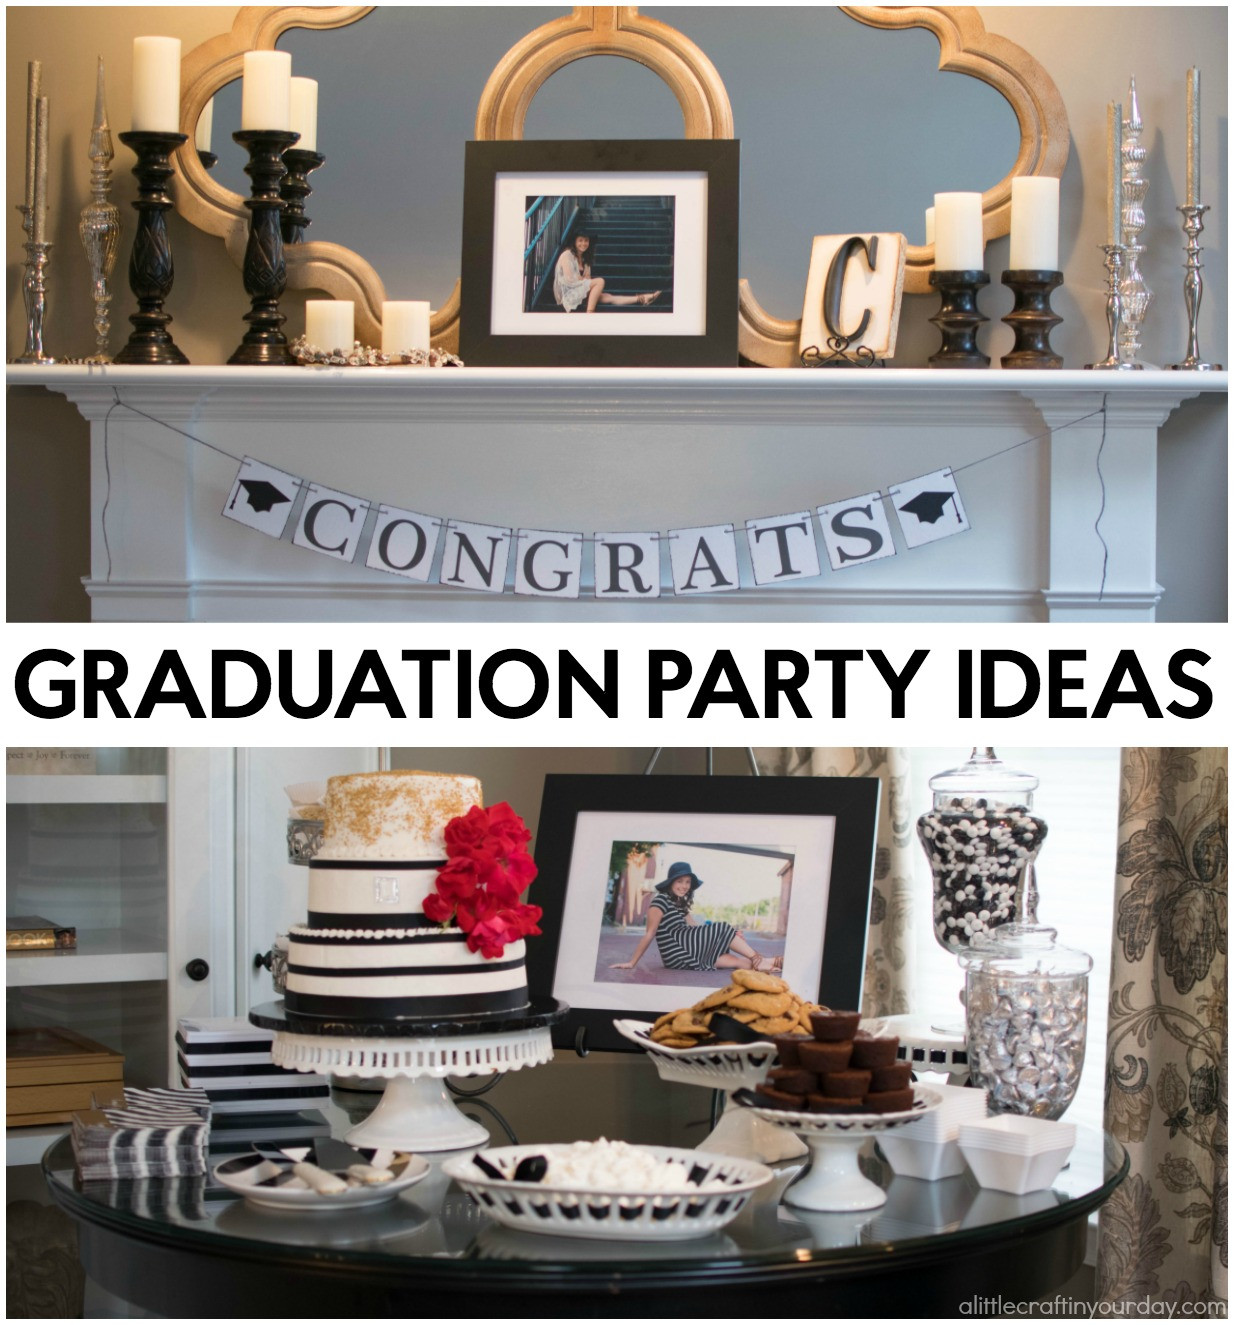 After Graduation Party Ideas
 Black & White Graduation Party A Little Craft In Your Day